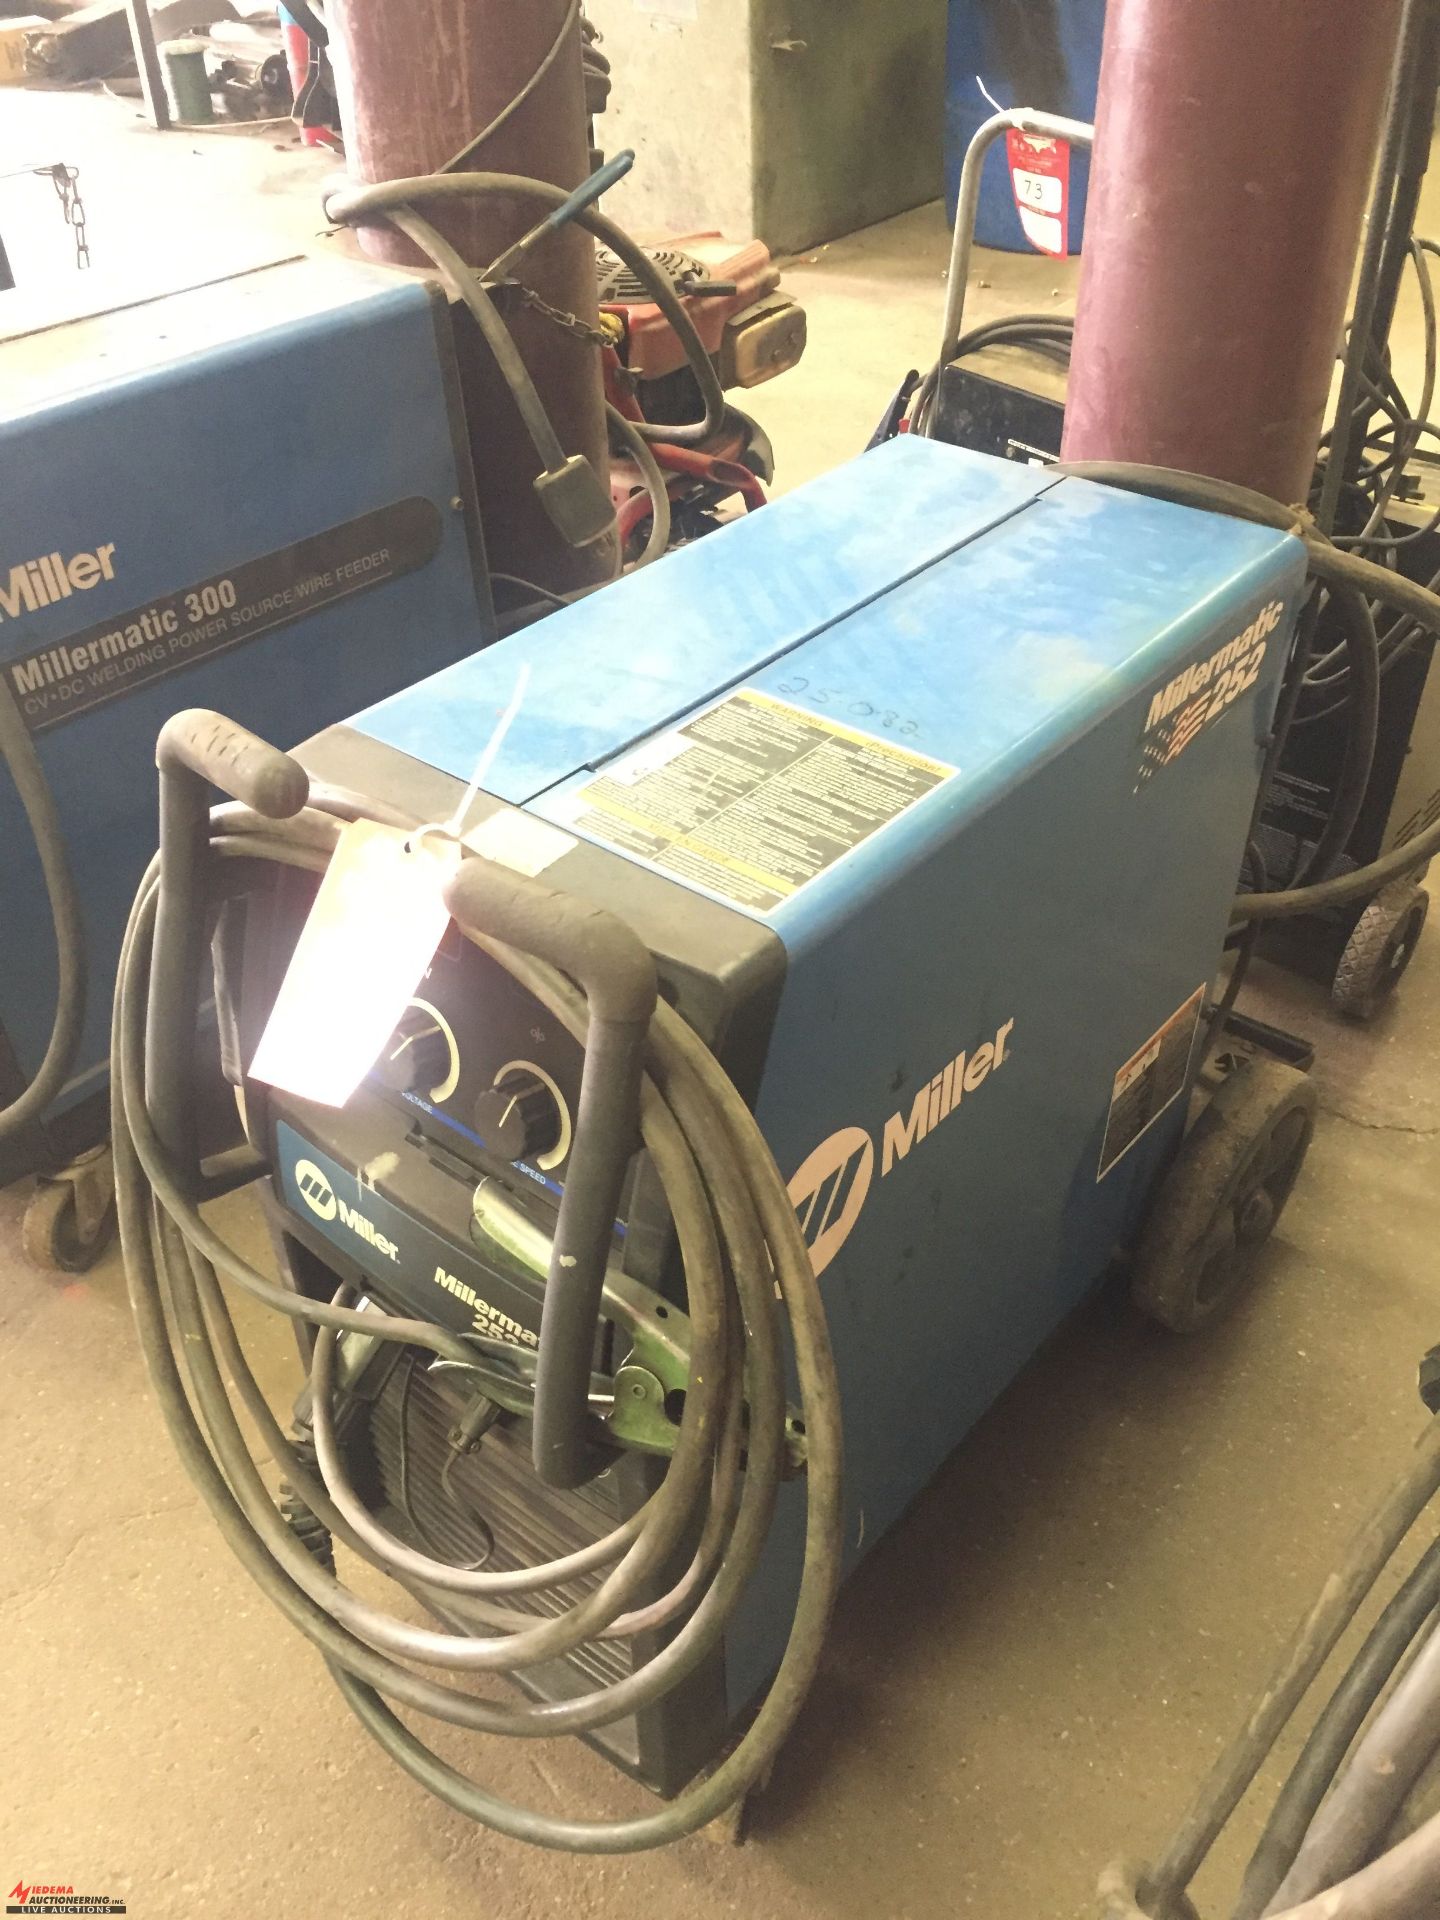 MILLER MILLERMATIC 252 WIRE FEED WELDER, 3 PHASE [TANK IS NOT INCLUDED] [LOCATION: EAST WINANS